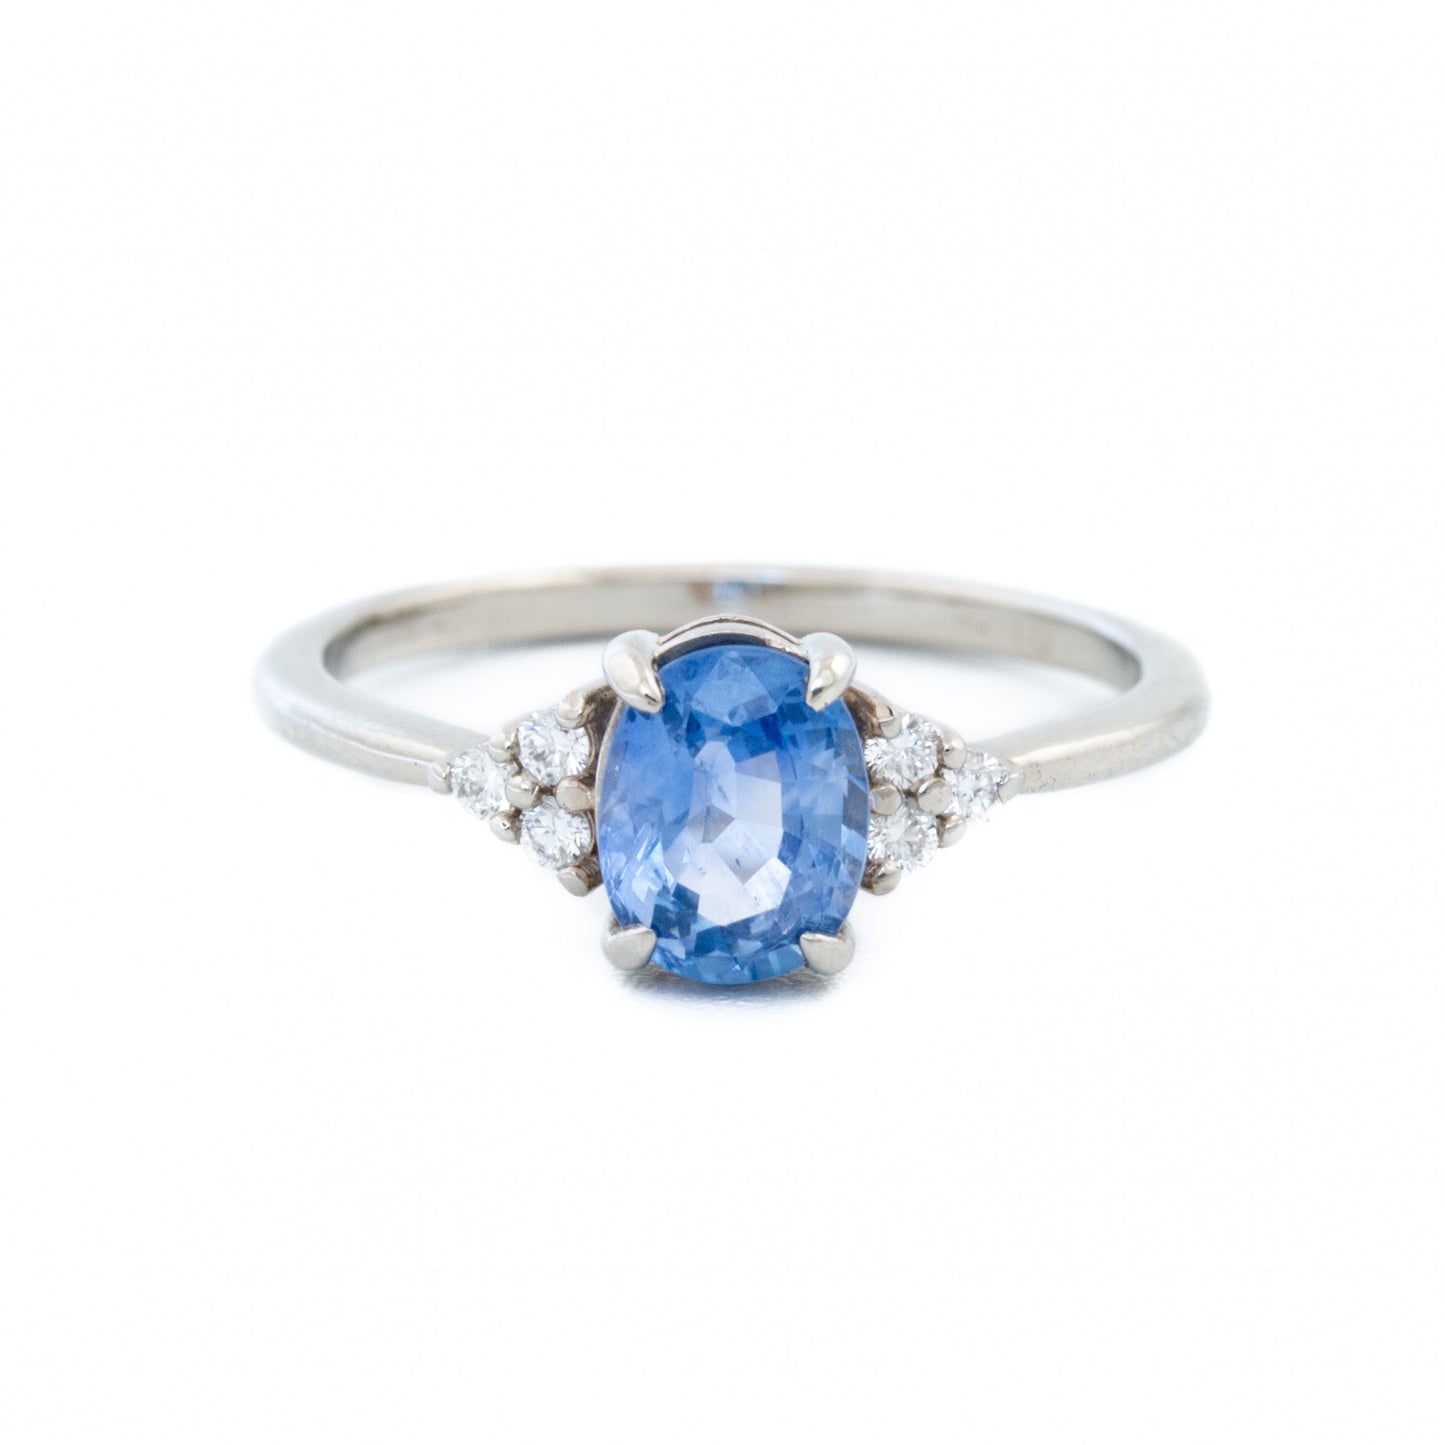 Periwinkle Sapphire Engagement Ring - Kingdom Jewelry